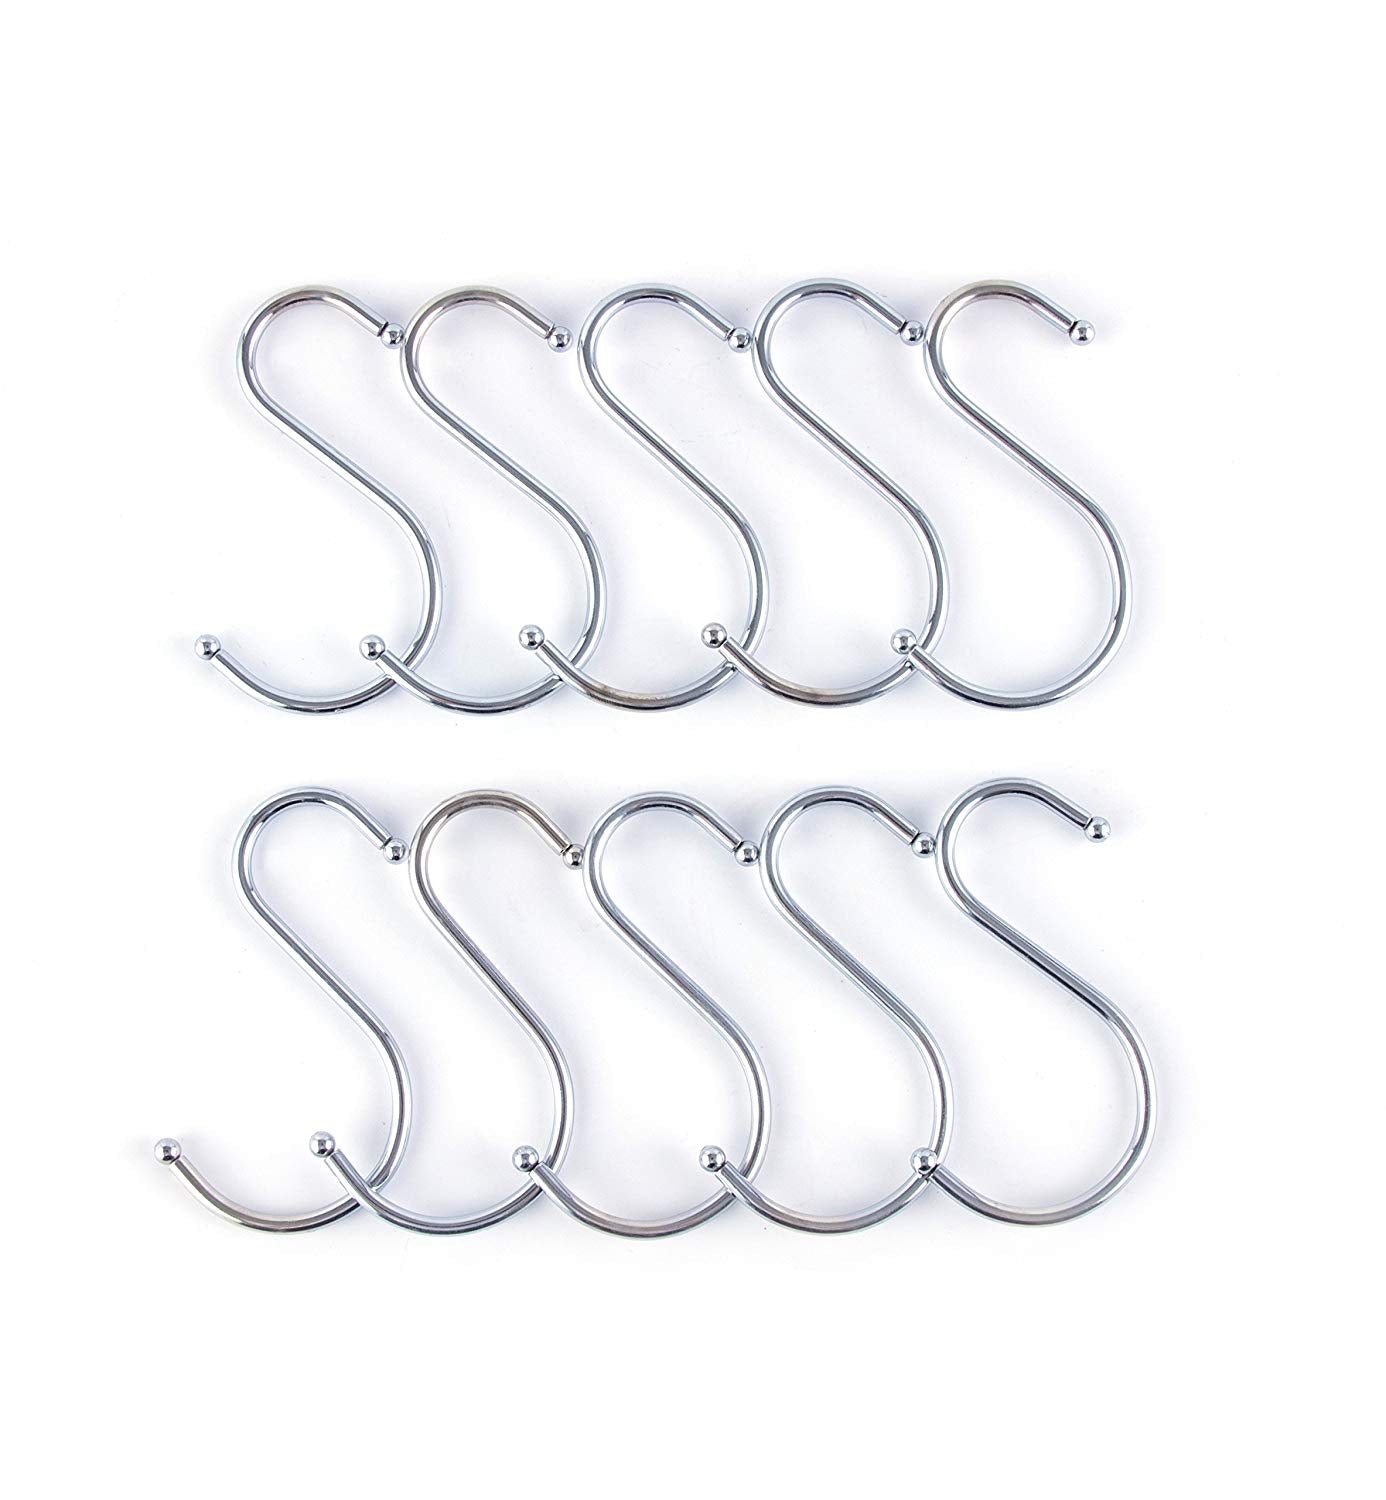 Prudance Medium Round S Shaped Hooks Stainless Steel Hanging Hooks Set 20 Hooks - Ideal Pots, Pans, Spoons Other Kitchen Essentials - Perfect Clothing